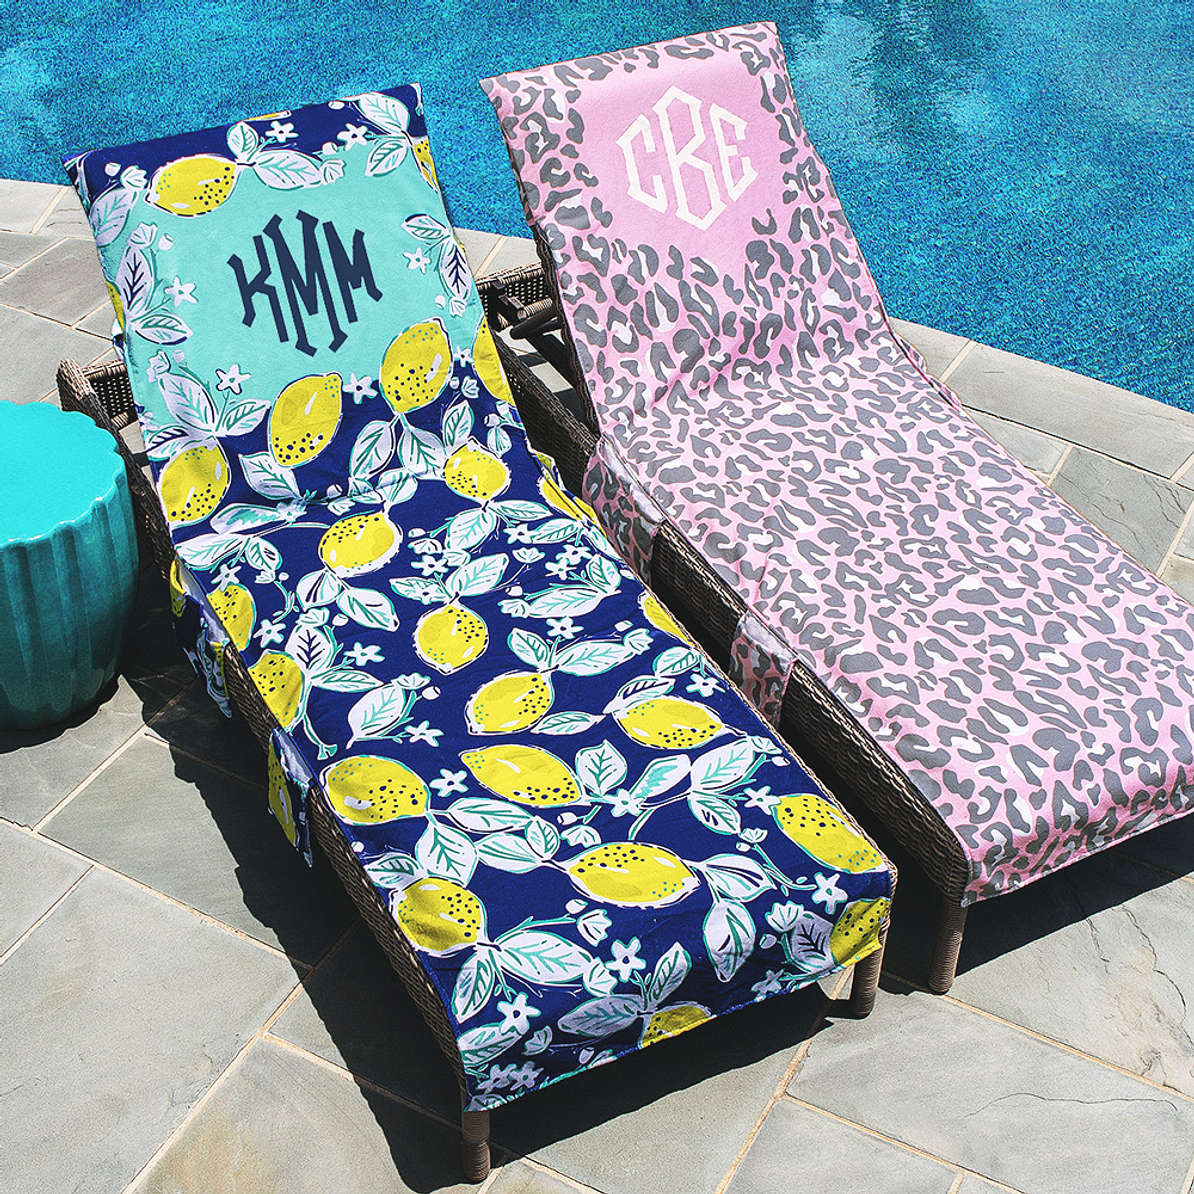 Monogrammed Lounge & Beach Chair Cover - Marleylilly